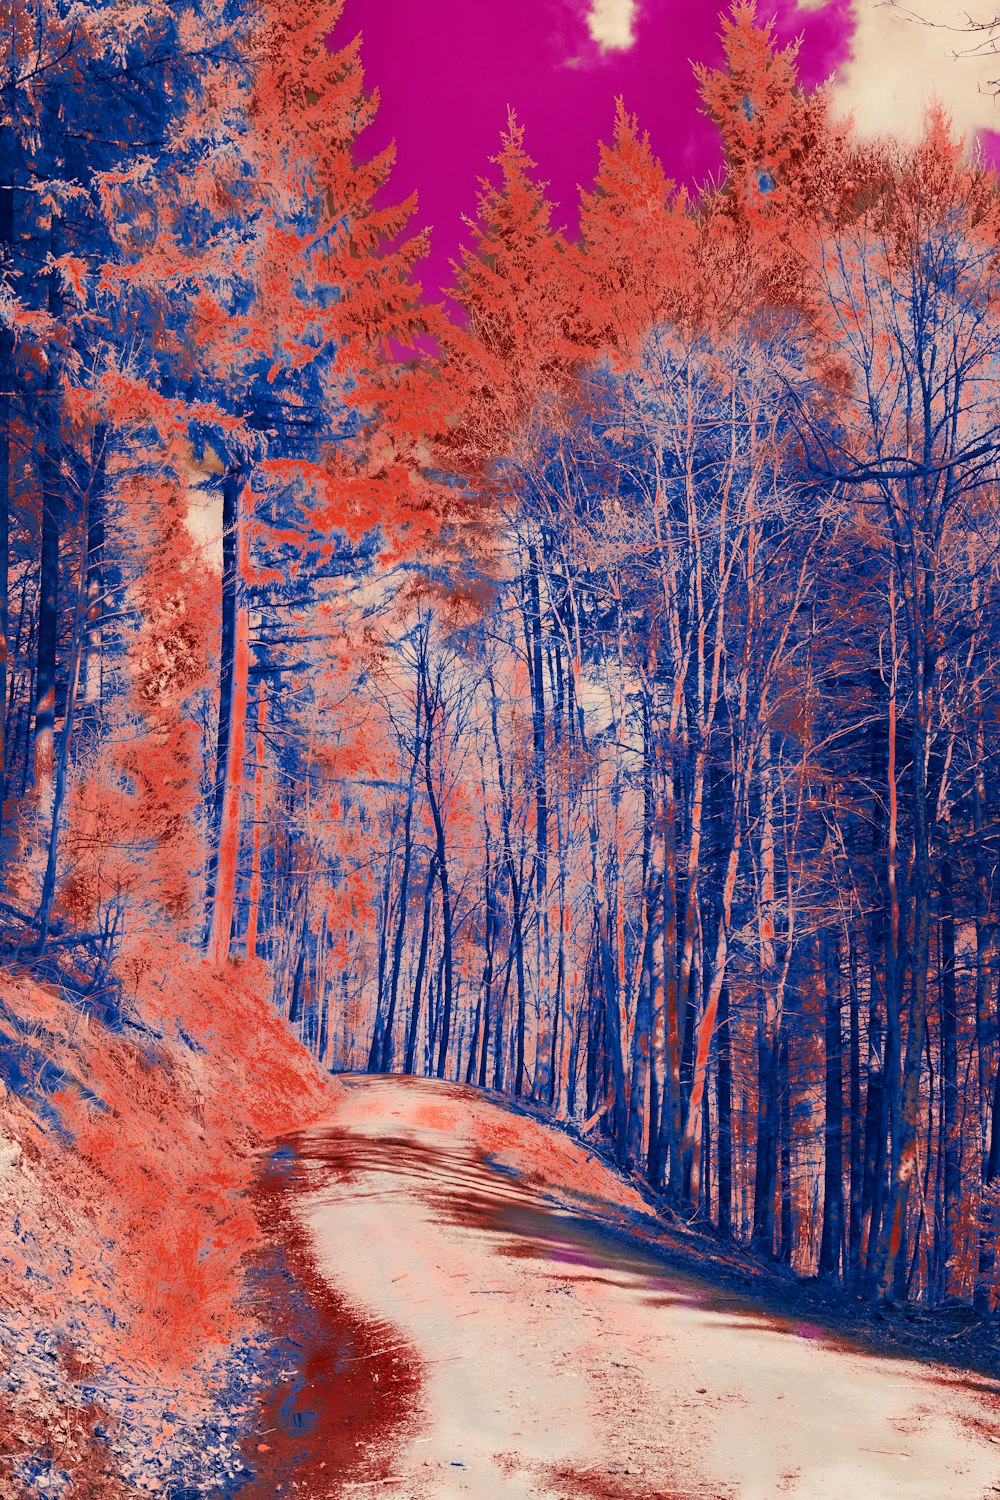 a painting of a road surrounded by trees